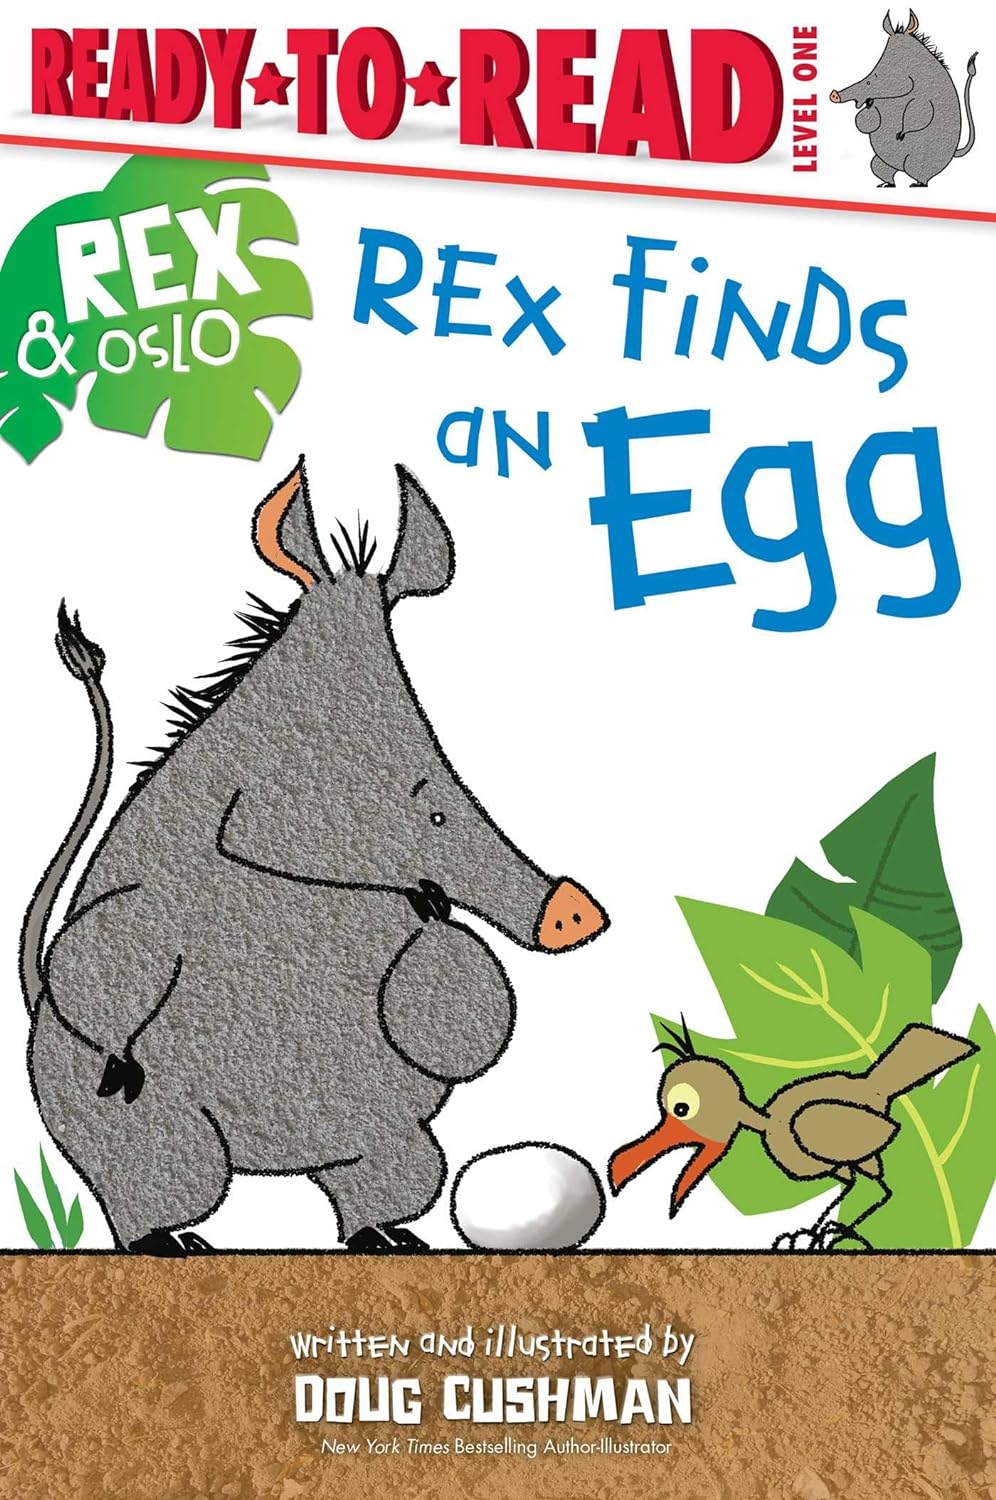 Image for "Rex Finds an Egg"